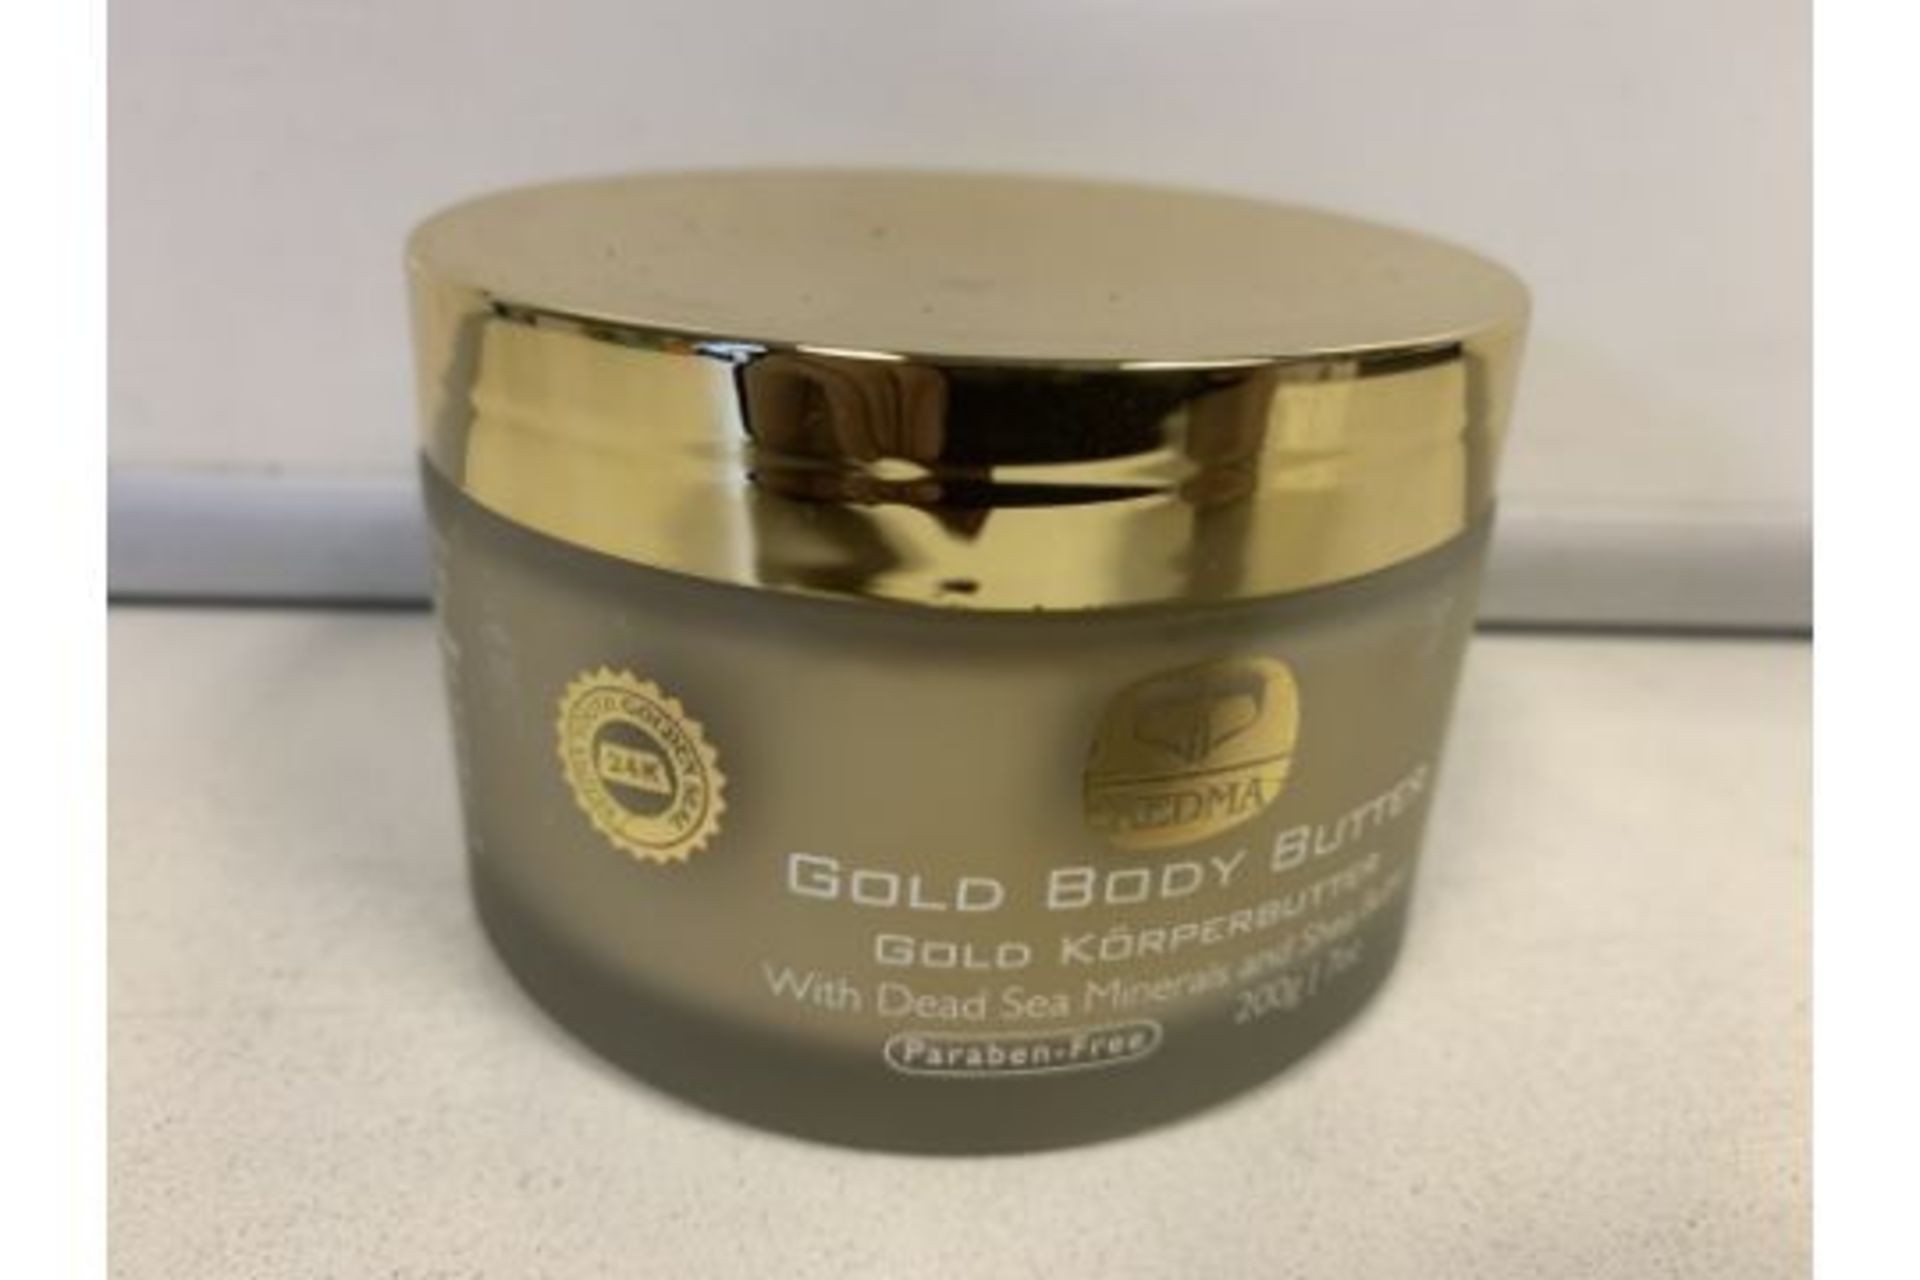 2 X BRAND NEW KEDMA GOLD BODY BUTTER WITH DEAD SEA MINERALS AND SHEA BUTTER